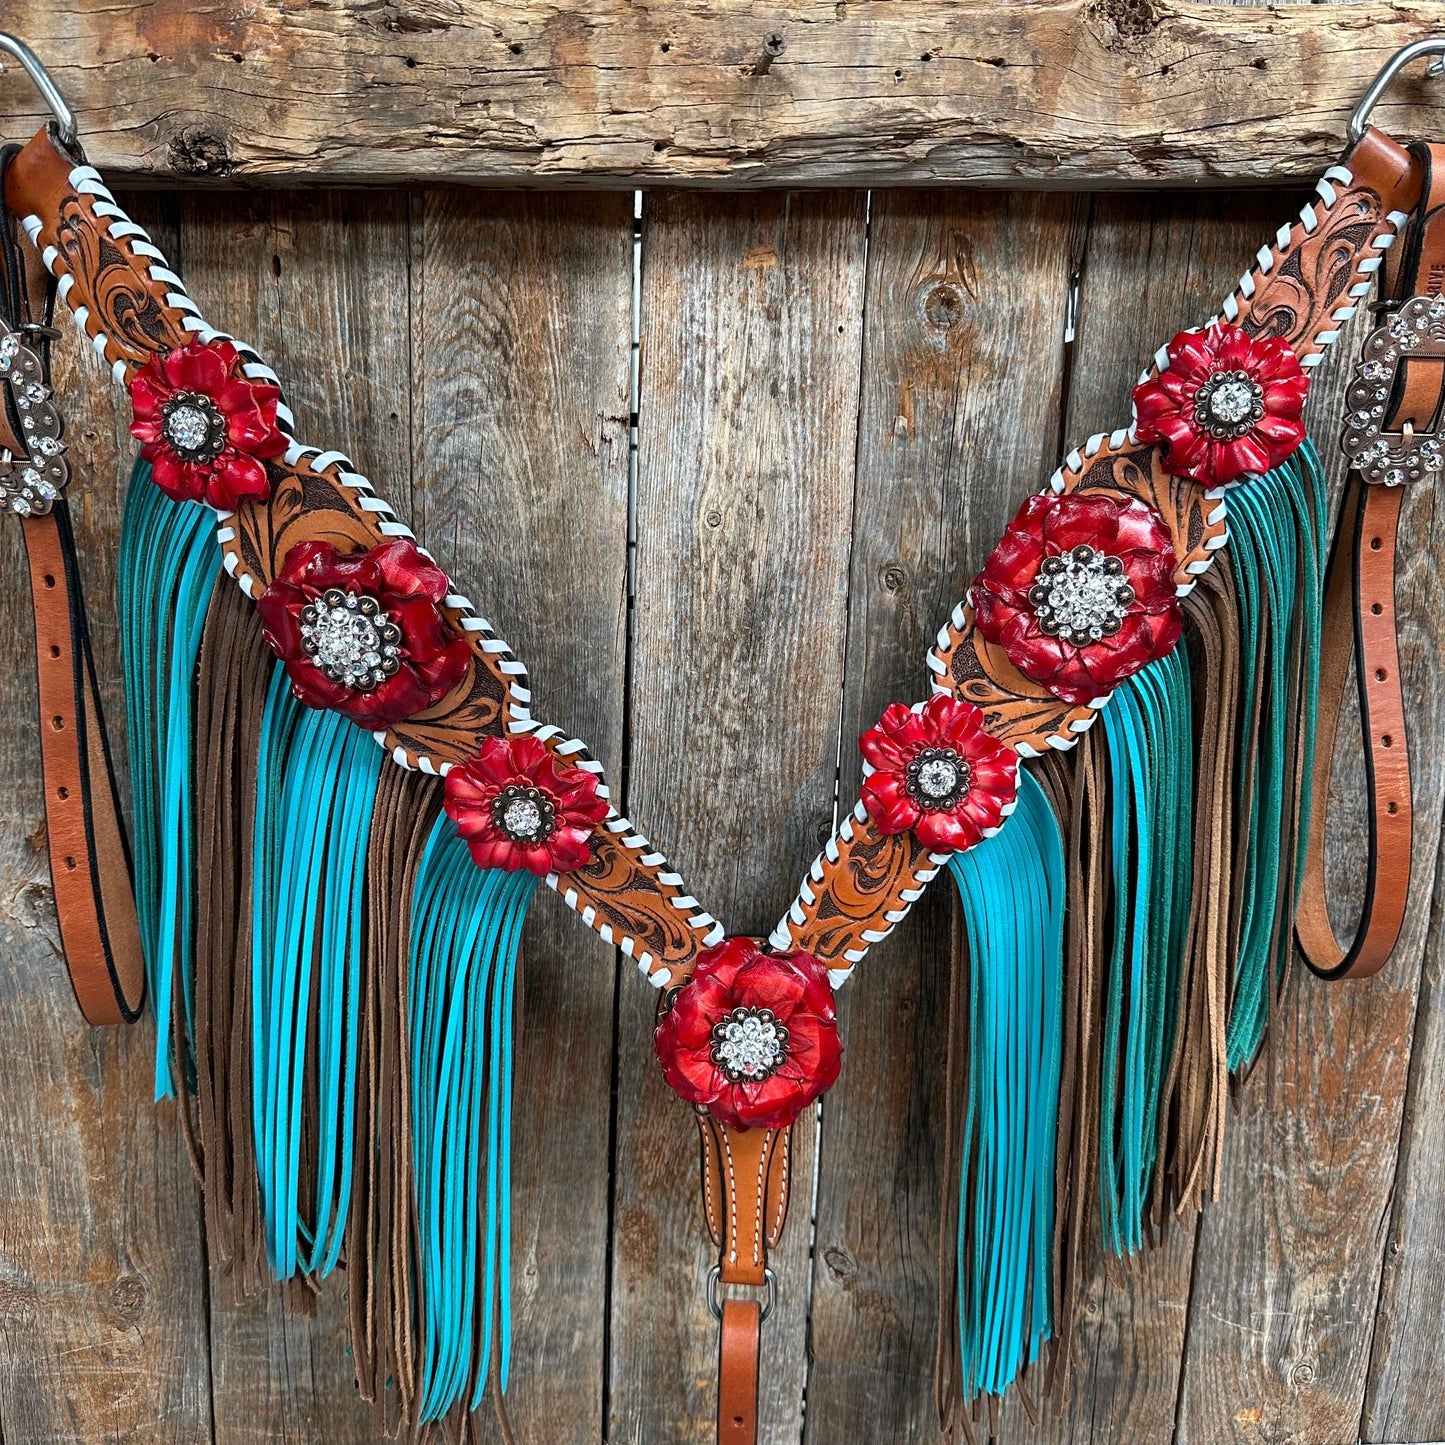 Light Oil Whipstitch Red and Turquoise One Ear/ Breastcollar #OEBC549 - RODEO DRIVE